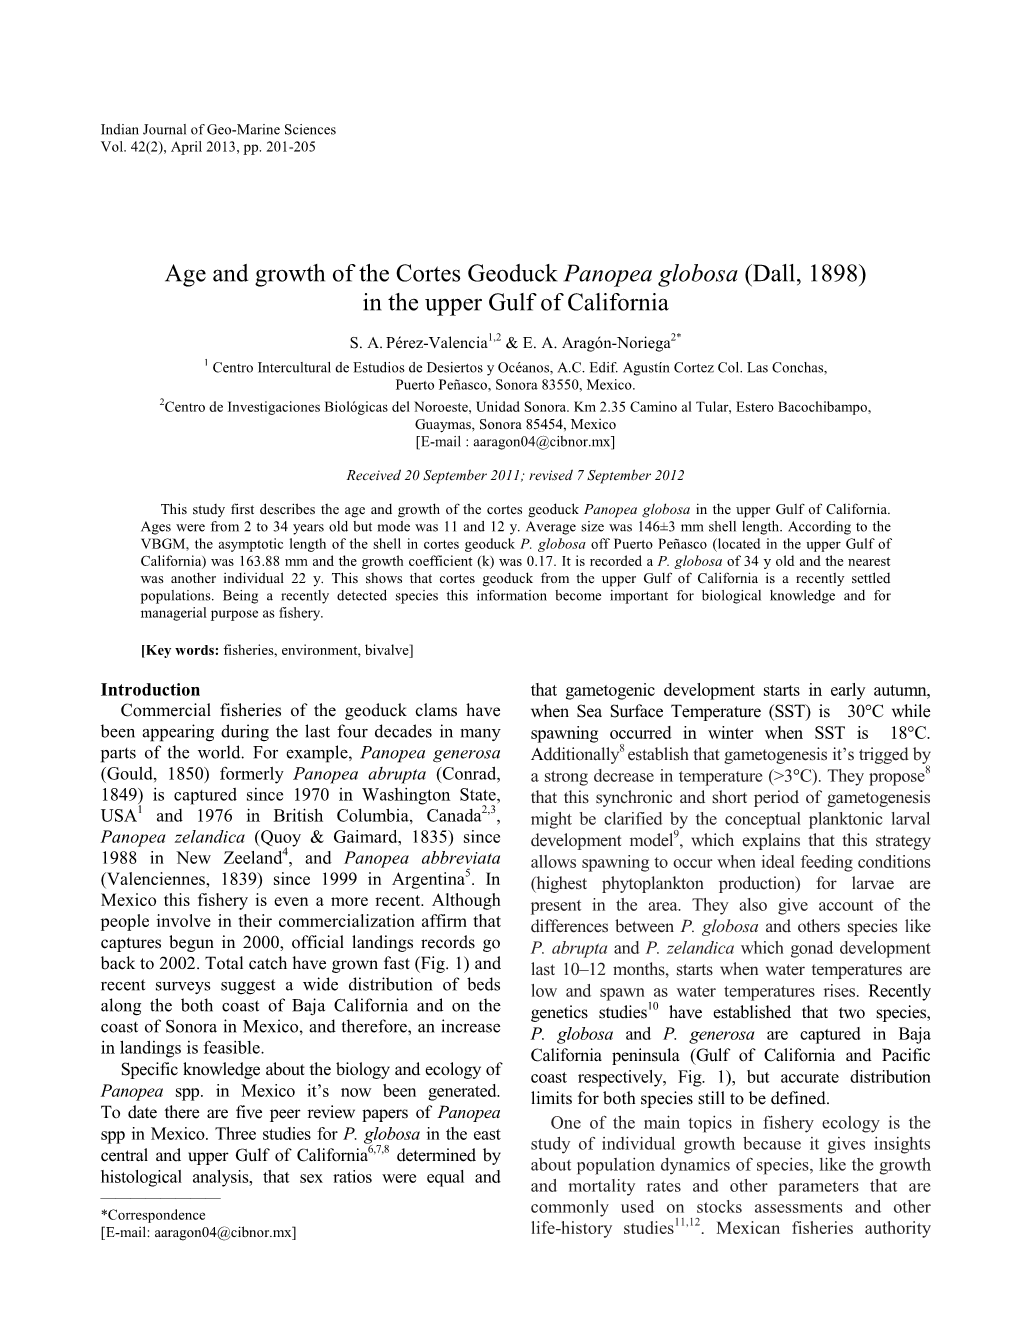 Age and Growth of the Cortes Geoduck Panopea Globosa (Dall, 1898) in the Upper Gulf of California